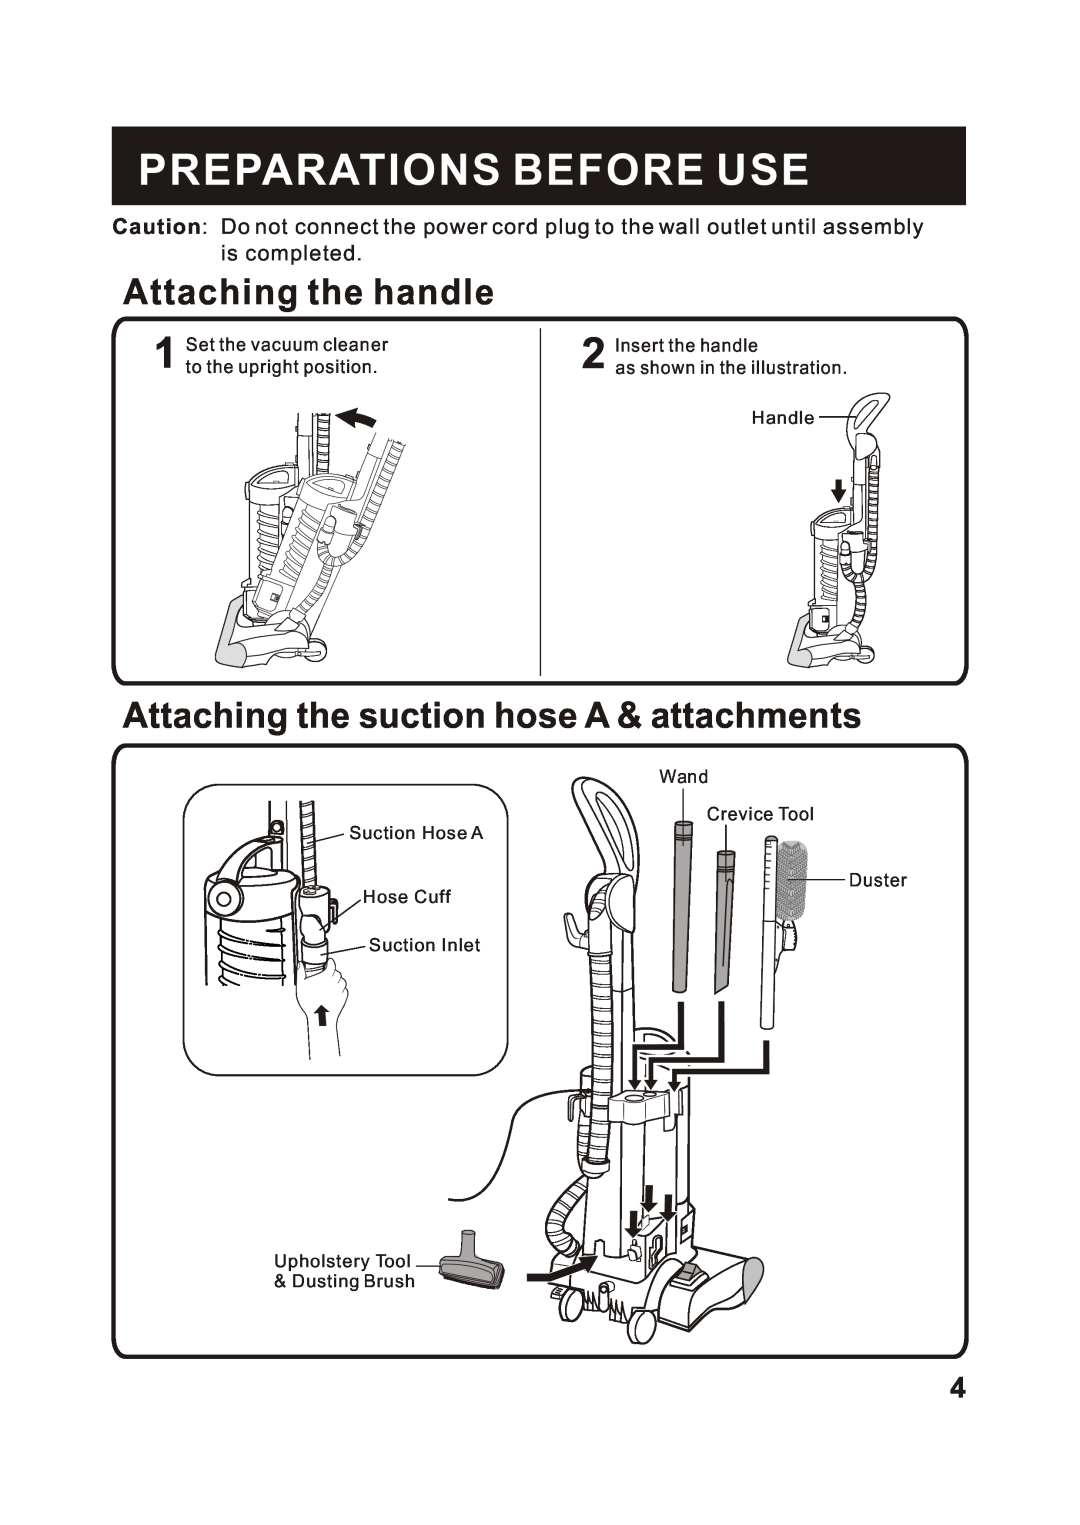 Fantom Vacuum FM766 Preparations Before Use, Attaching the handle, Attaching the suction hose A & attachments, Handle 